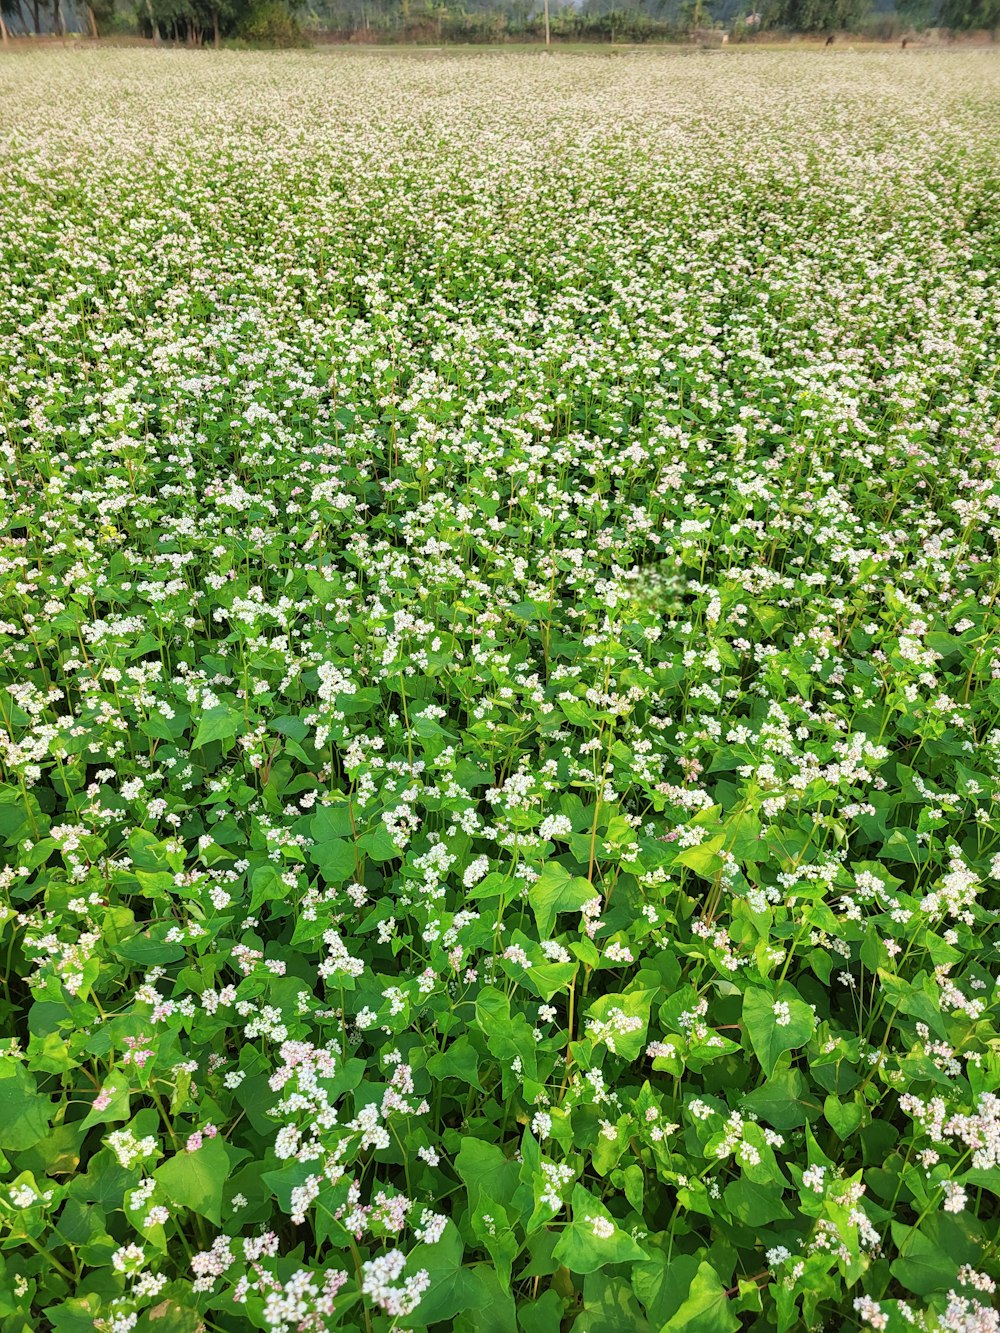 a large field of white flowers with green leaves